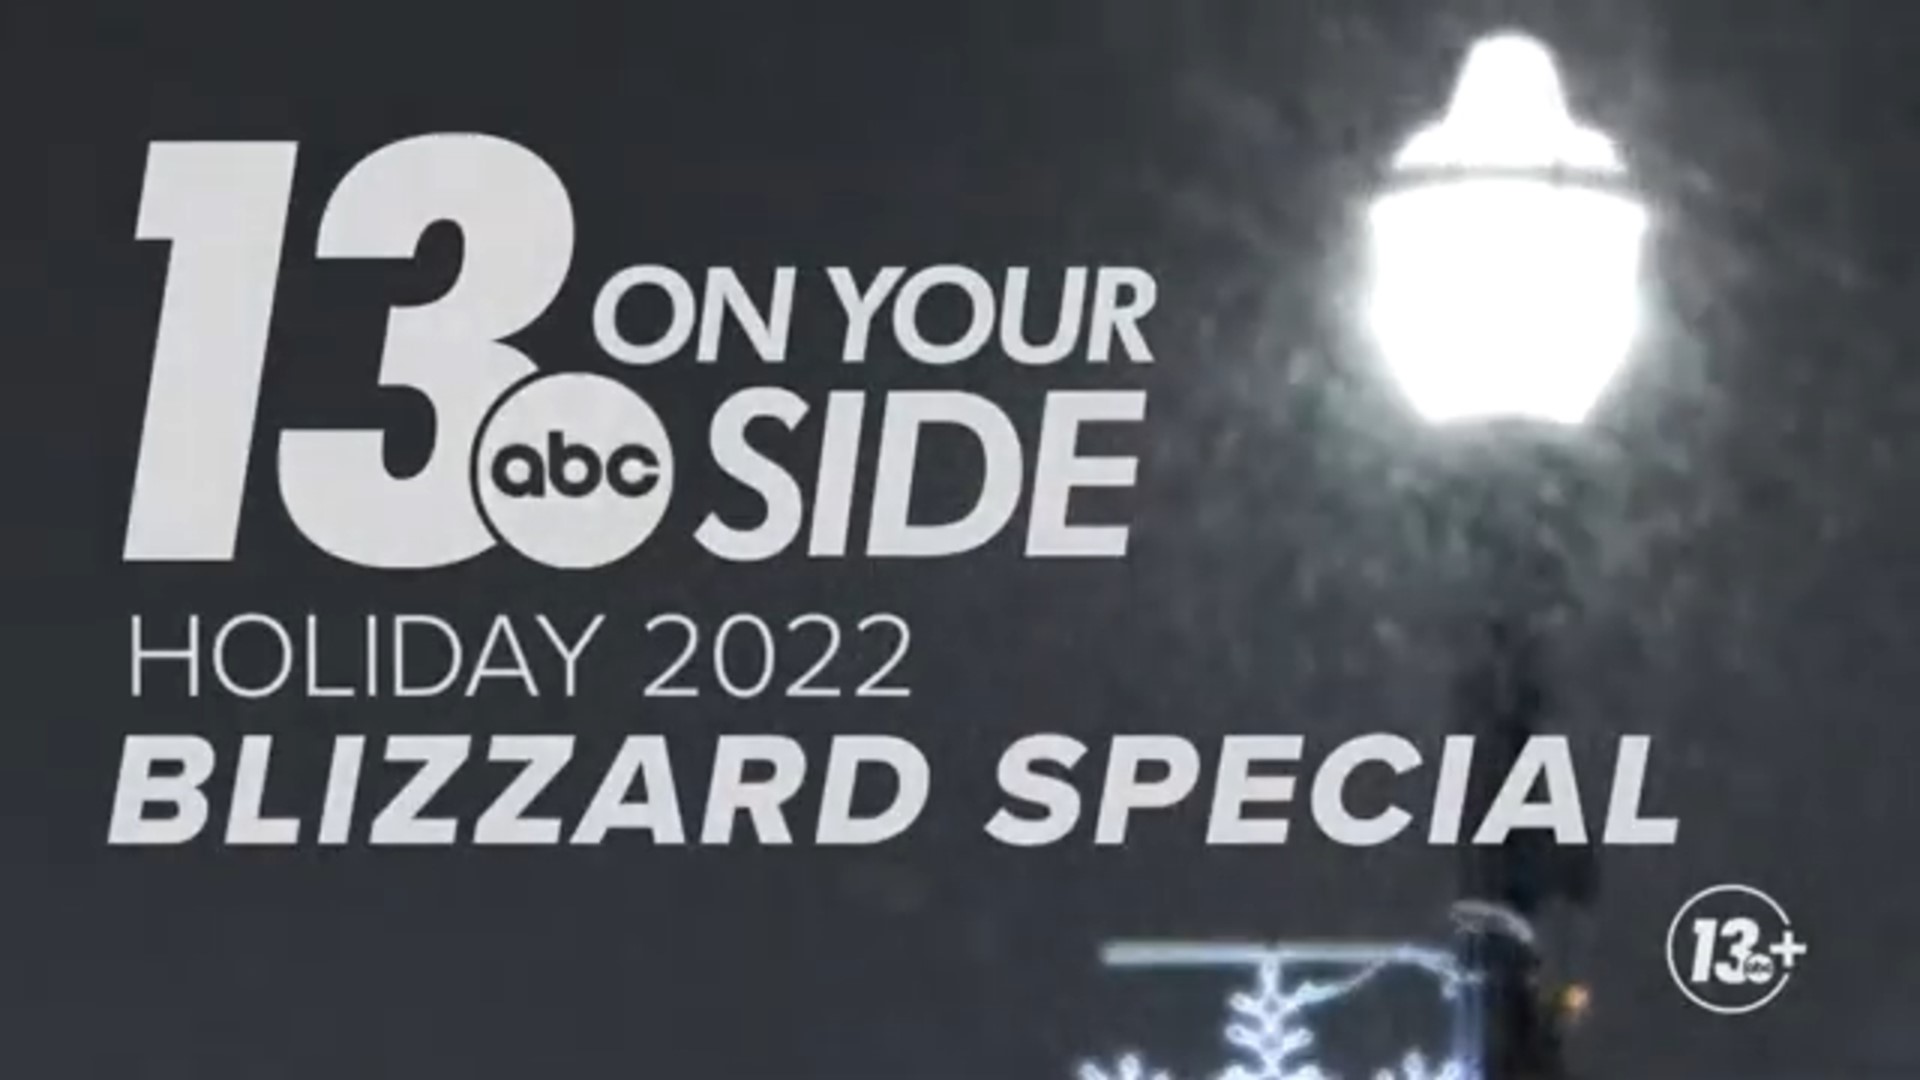 George Lessens, Michael Behrens, Samantha Jacques and Blake Hansen explore the holiday blizzard of 2022.